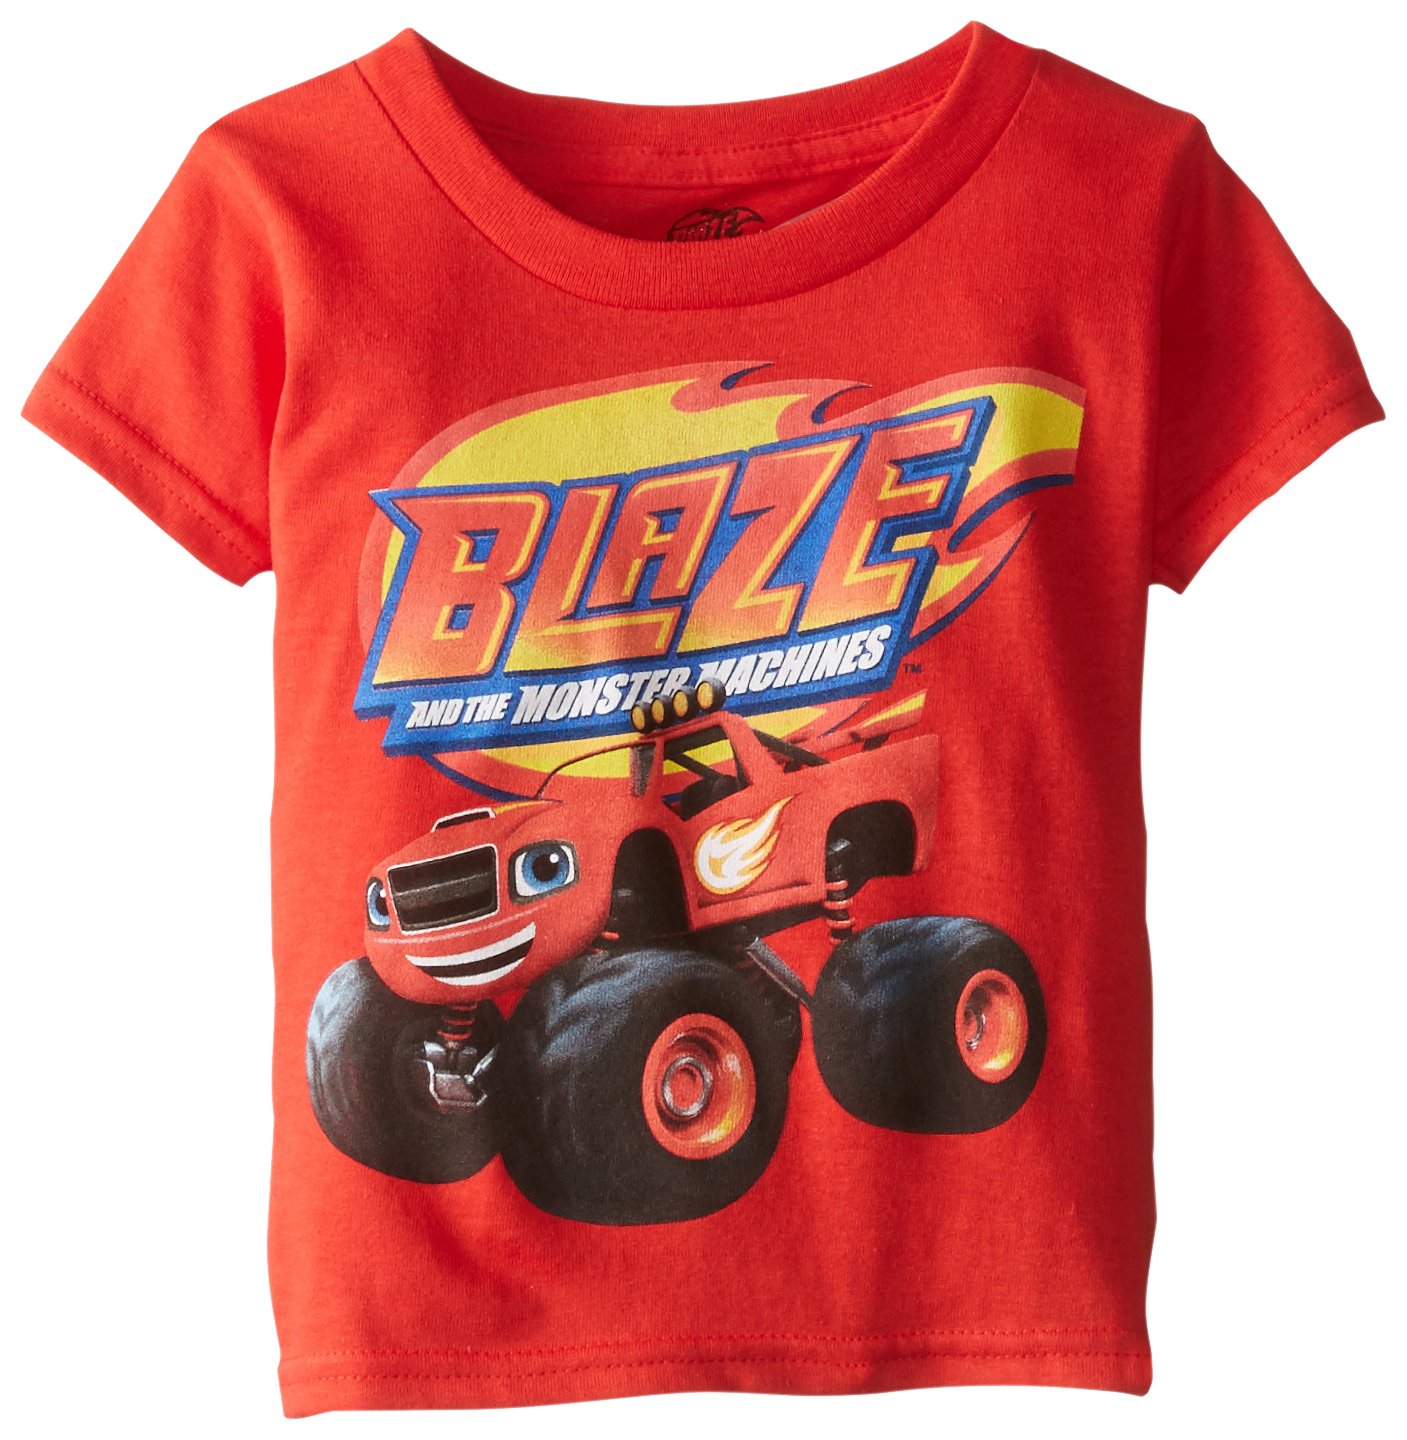 Blaze and the Monster Machines Boys' Short Sleeve T-Shirt by Nickelodeon